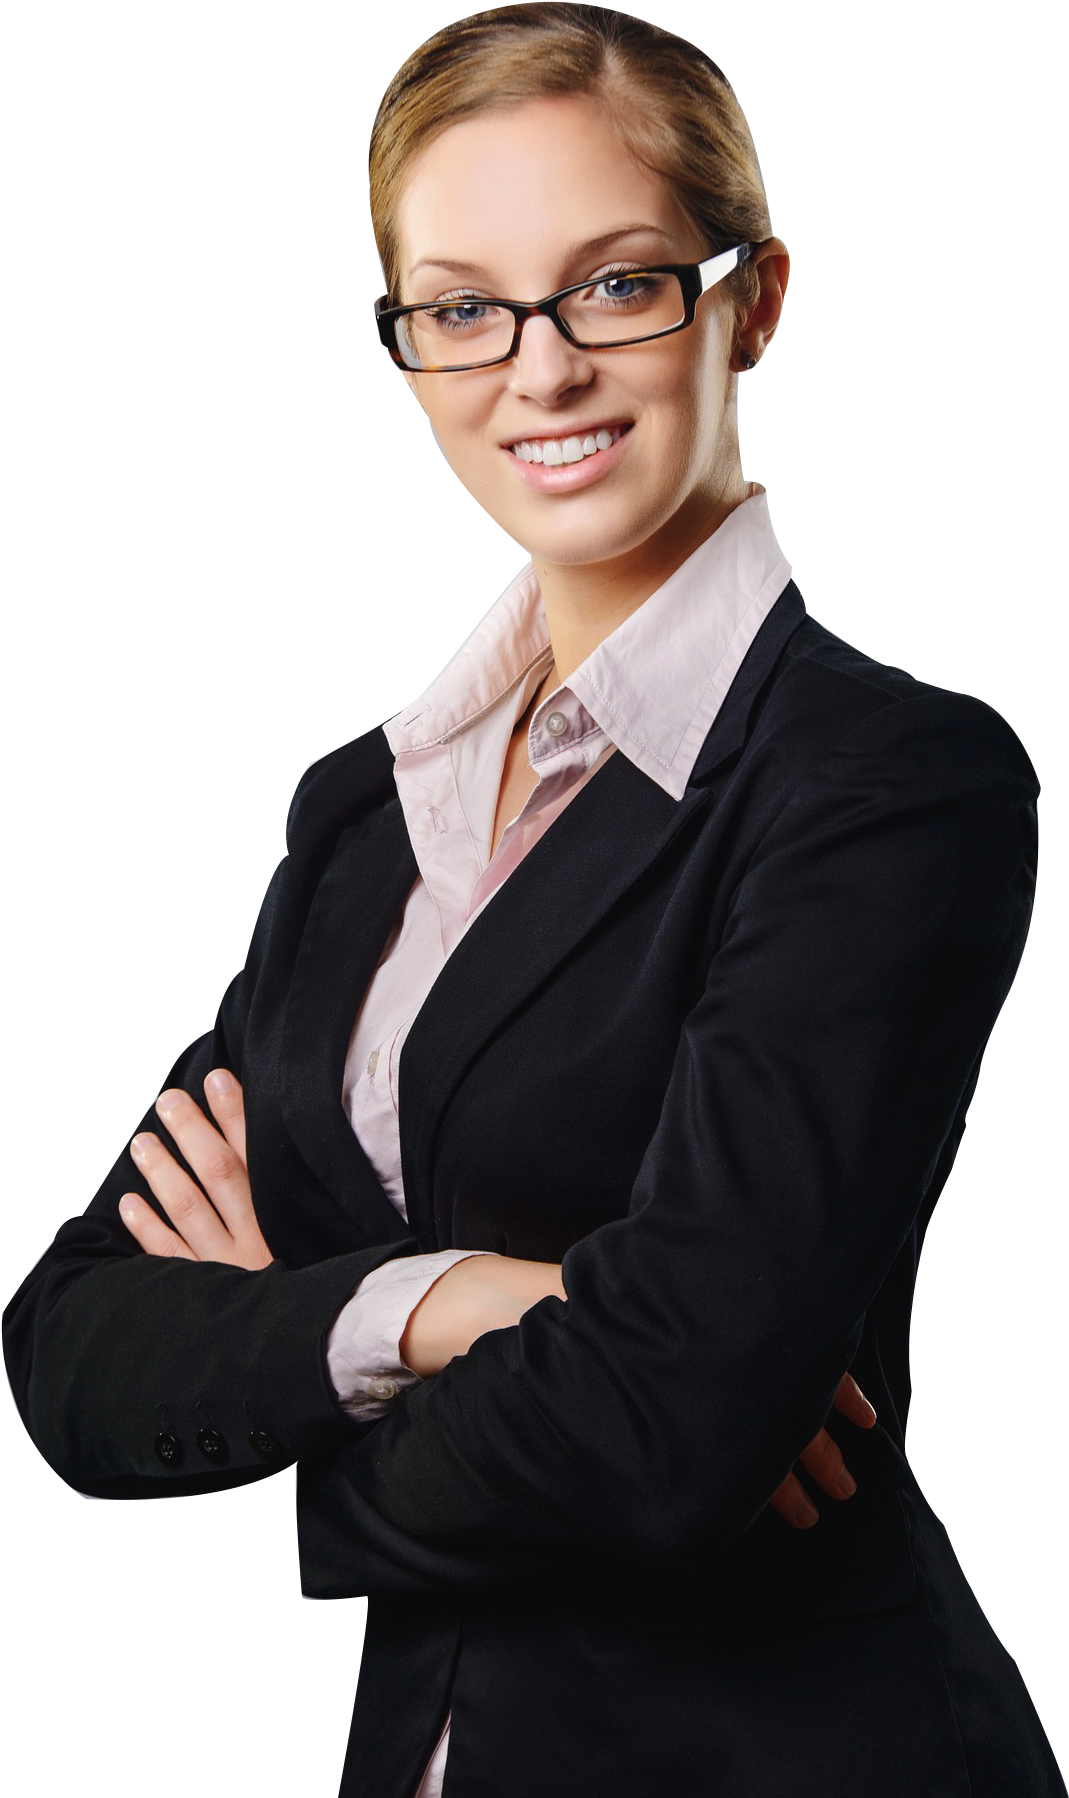 Business Woman Smiling And Standing With Her Arms Crossed, Hd Png Download